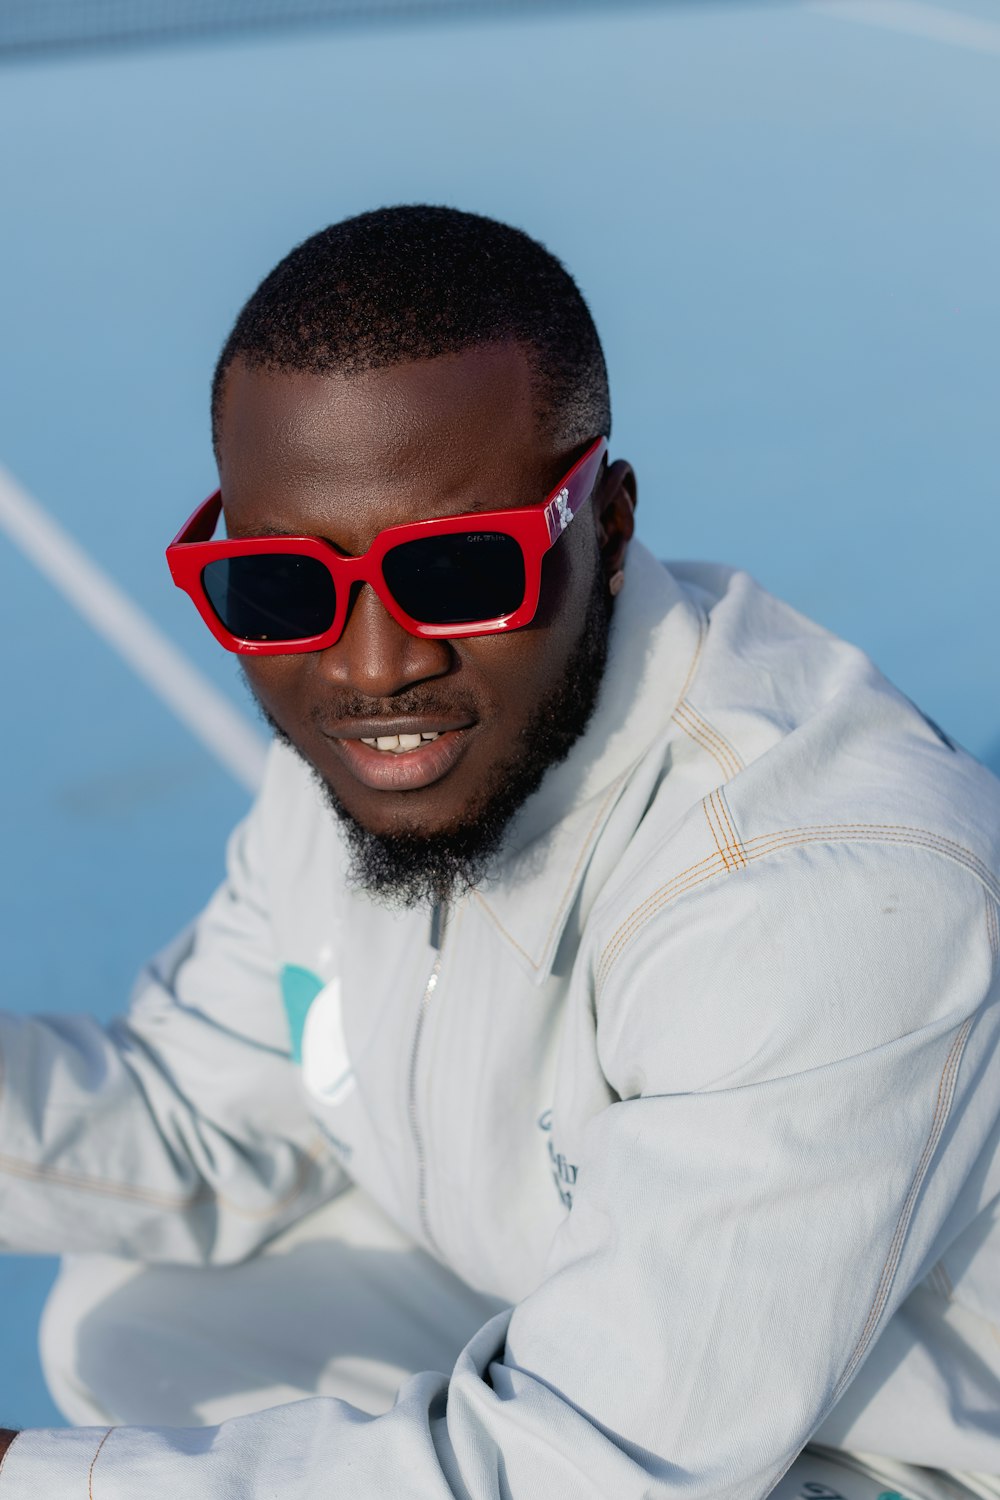 a man wearing red sunglasses sitting on a tennis court